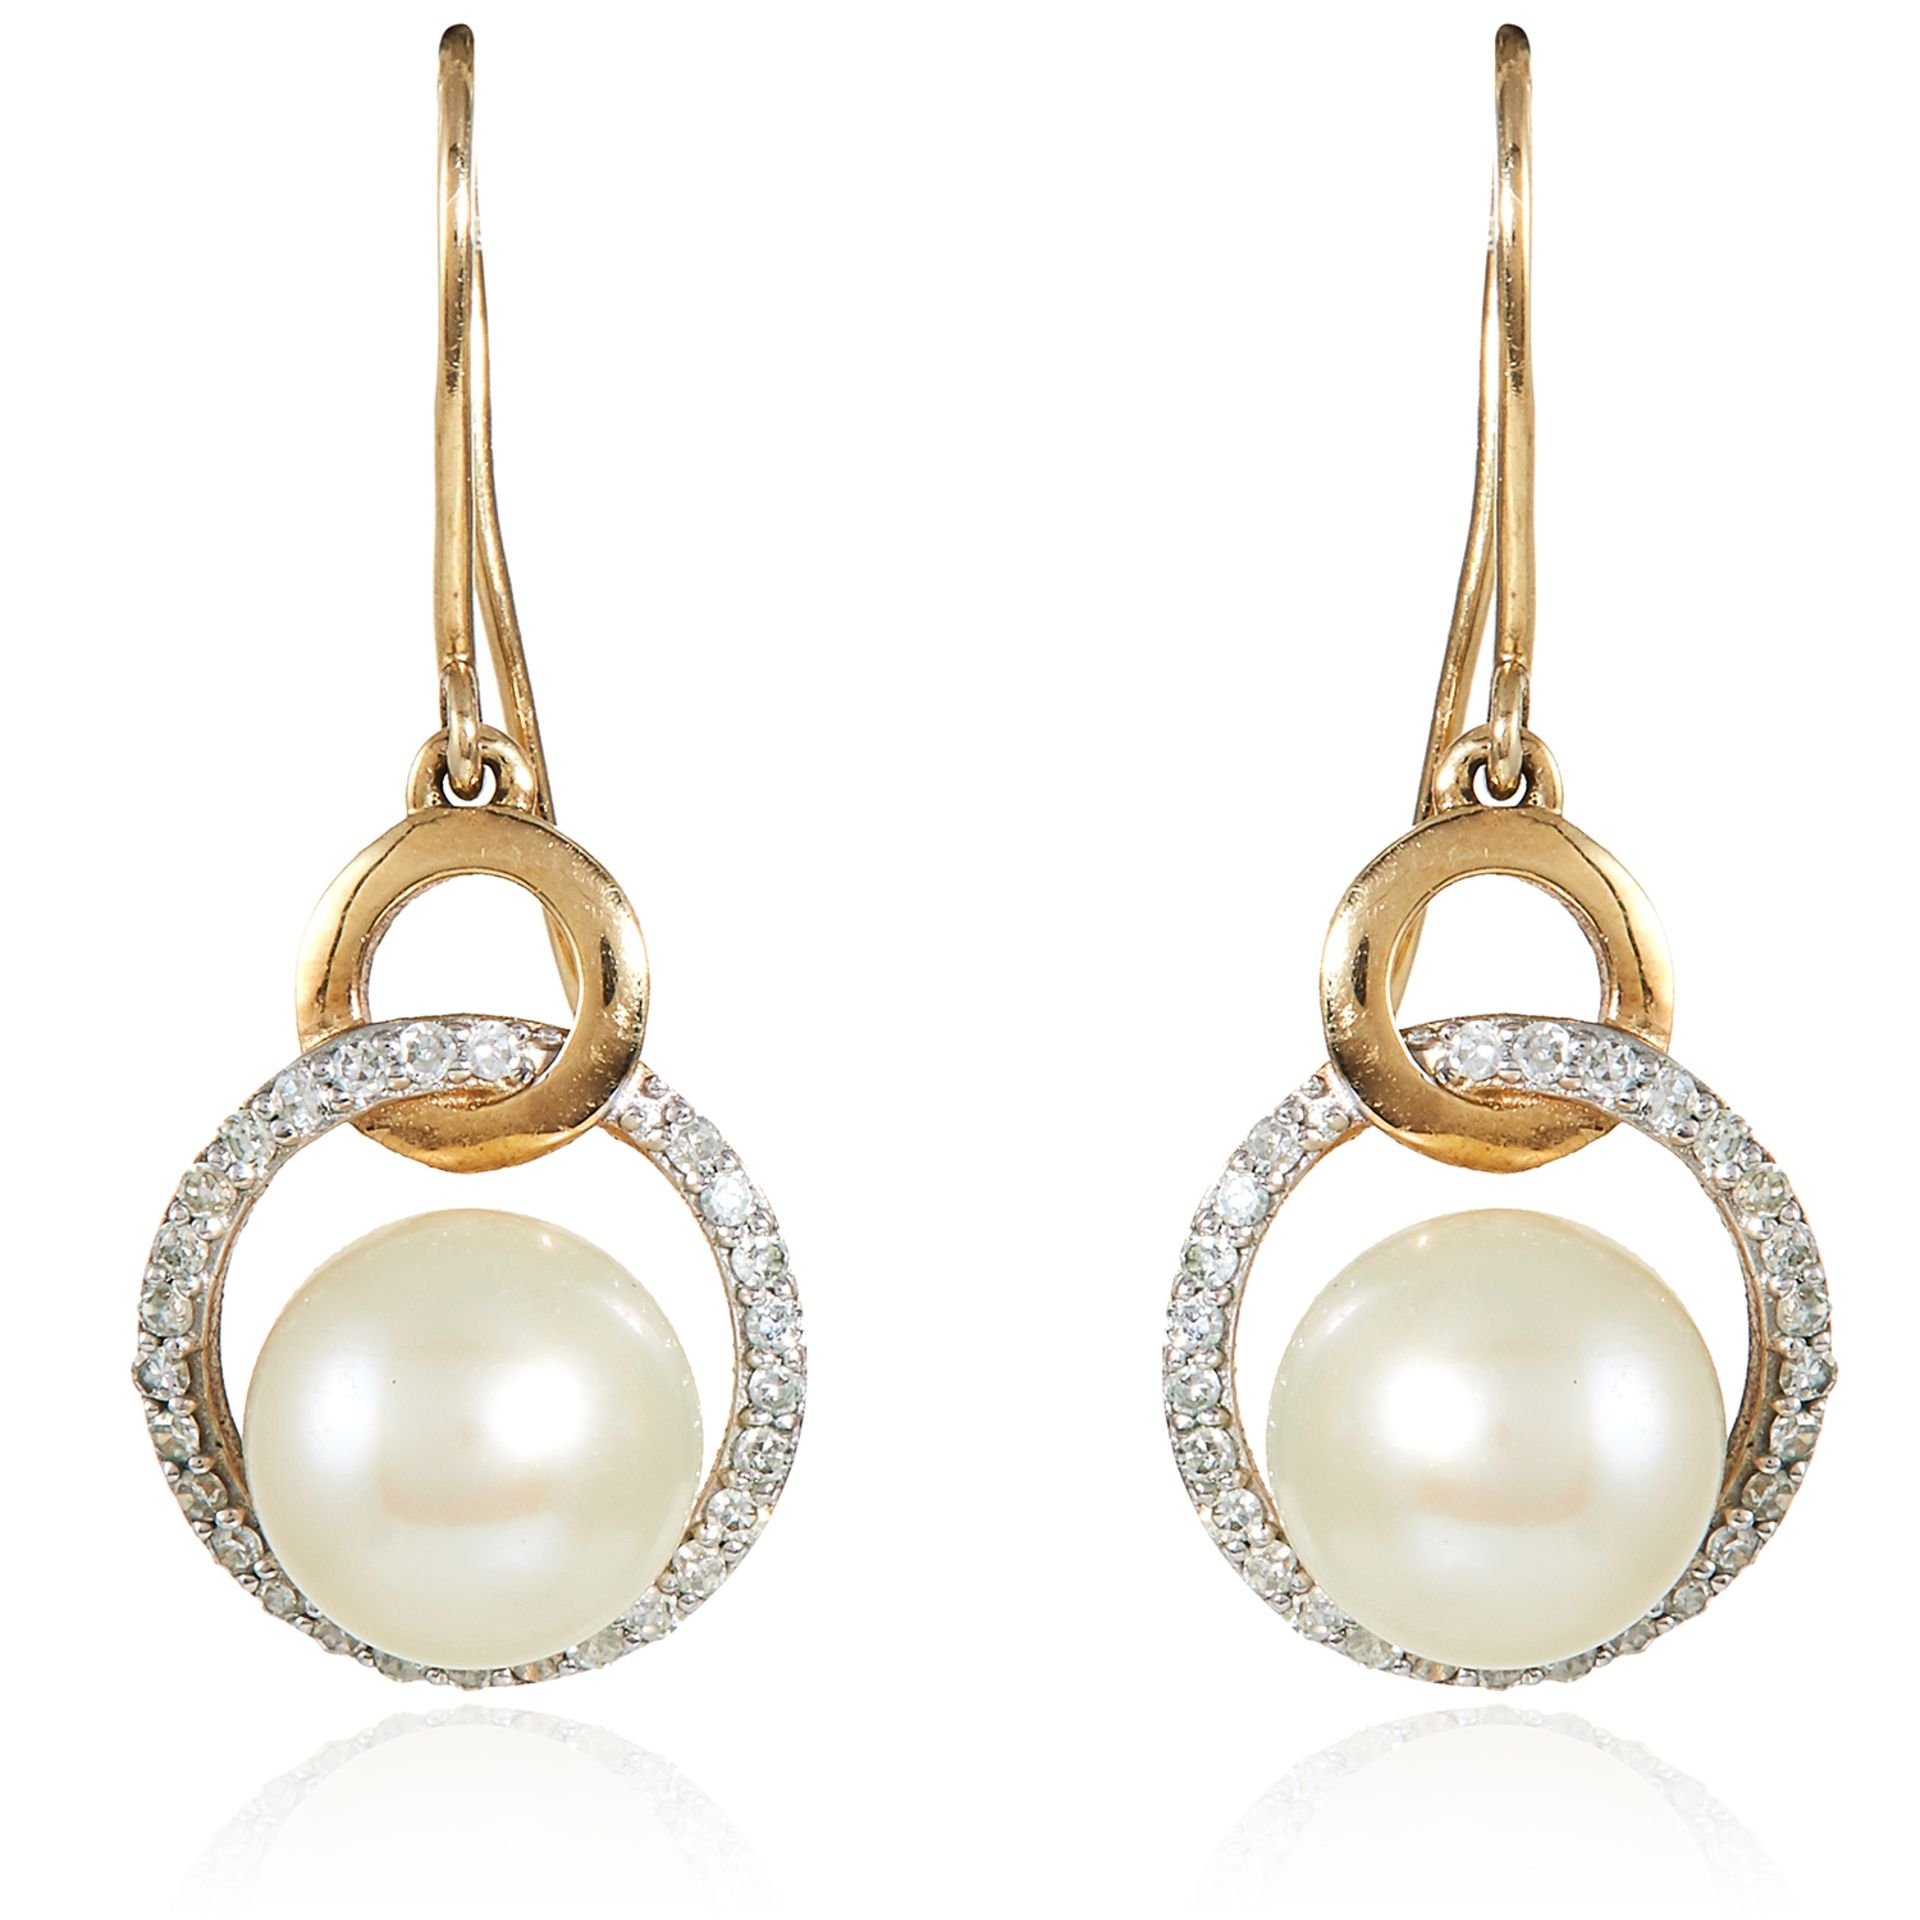 A PAIR OF PEARL AND DIAMOND EARRINGS in high carat yellow gold, each set with a pearl of 6.5mm